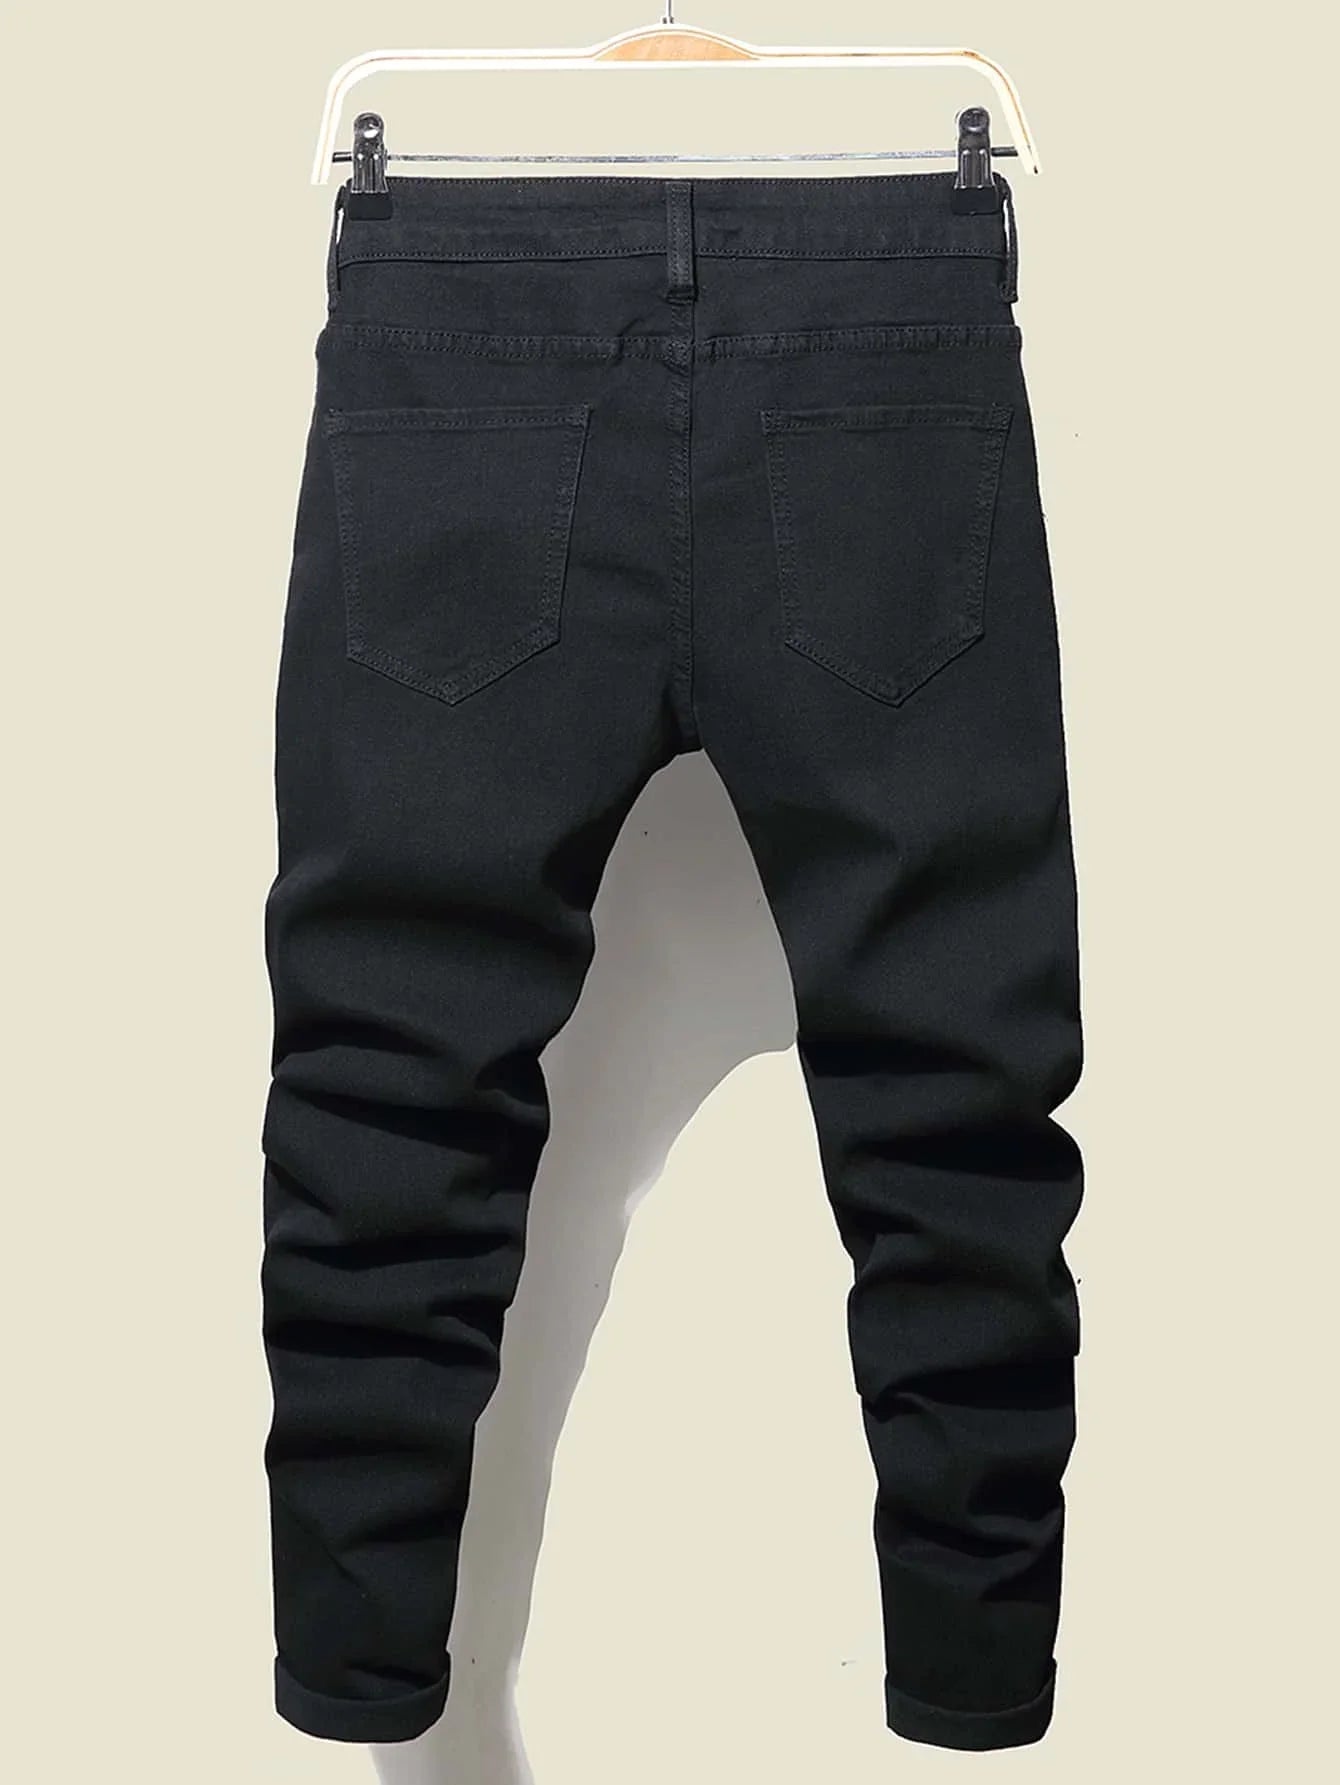 Streetwear Men's Pants: Hip Hop Skinny Jeans with Ripped Details, Solid Stretch Denim